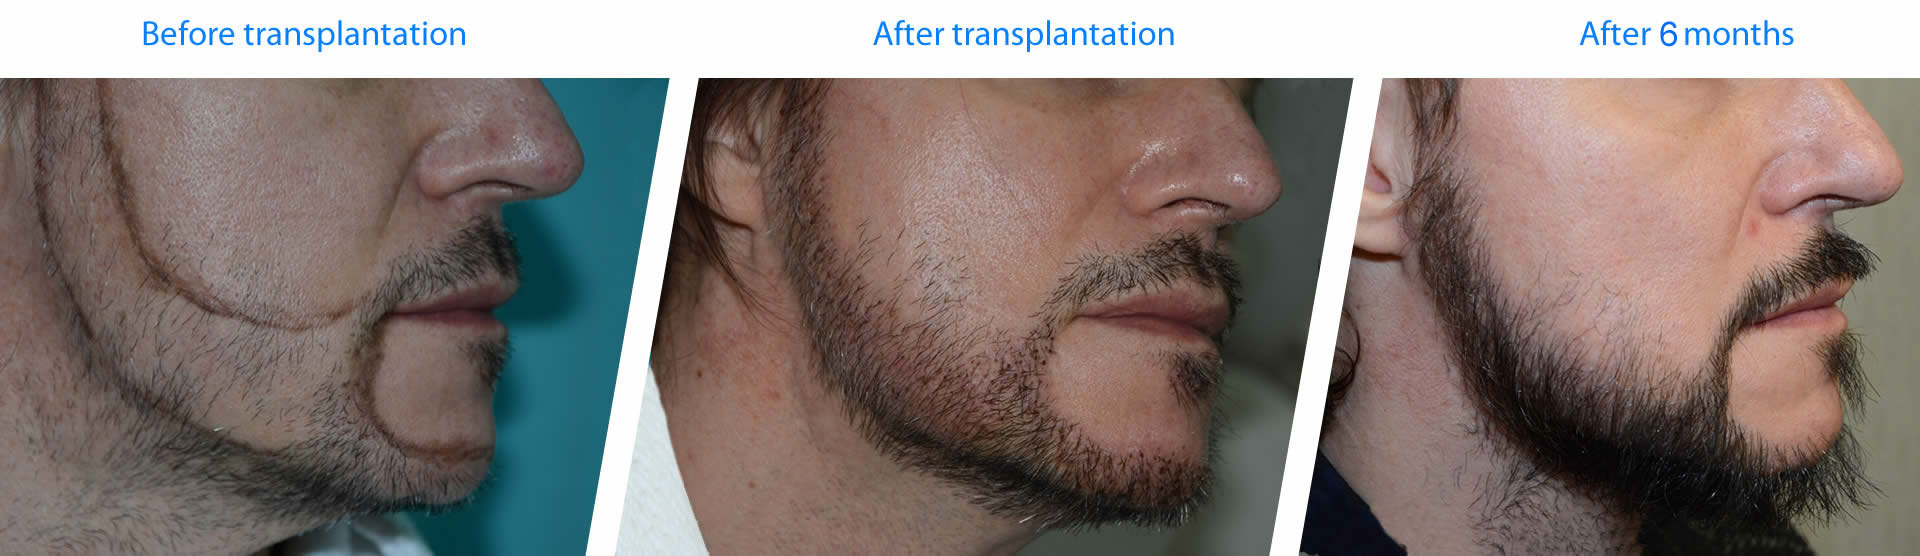 beard transplant examples and results